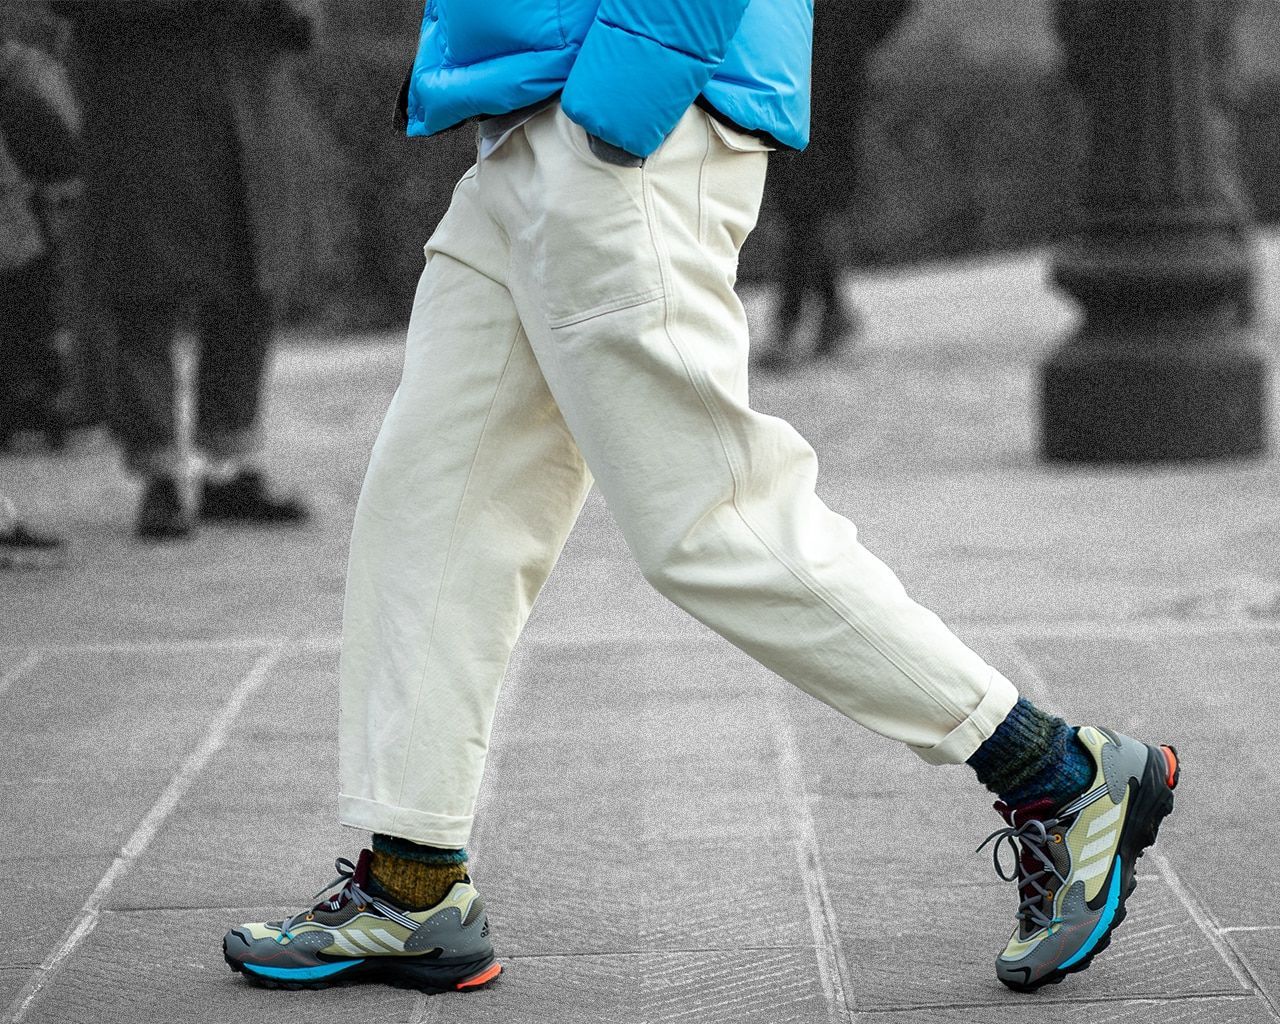 A person wearing a blue jacket and white pants walking down a street. - Gorpcore